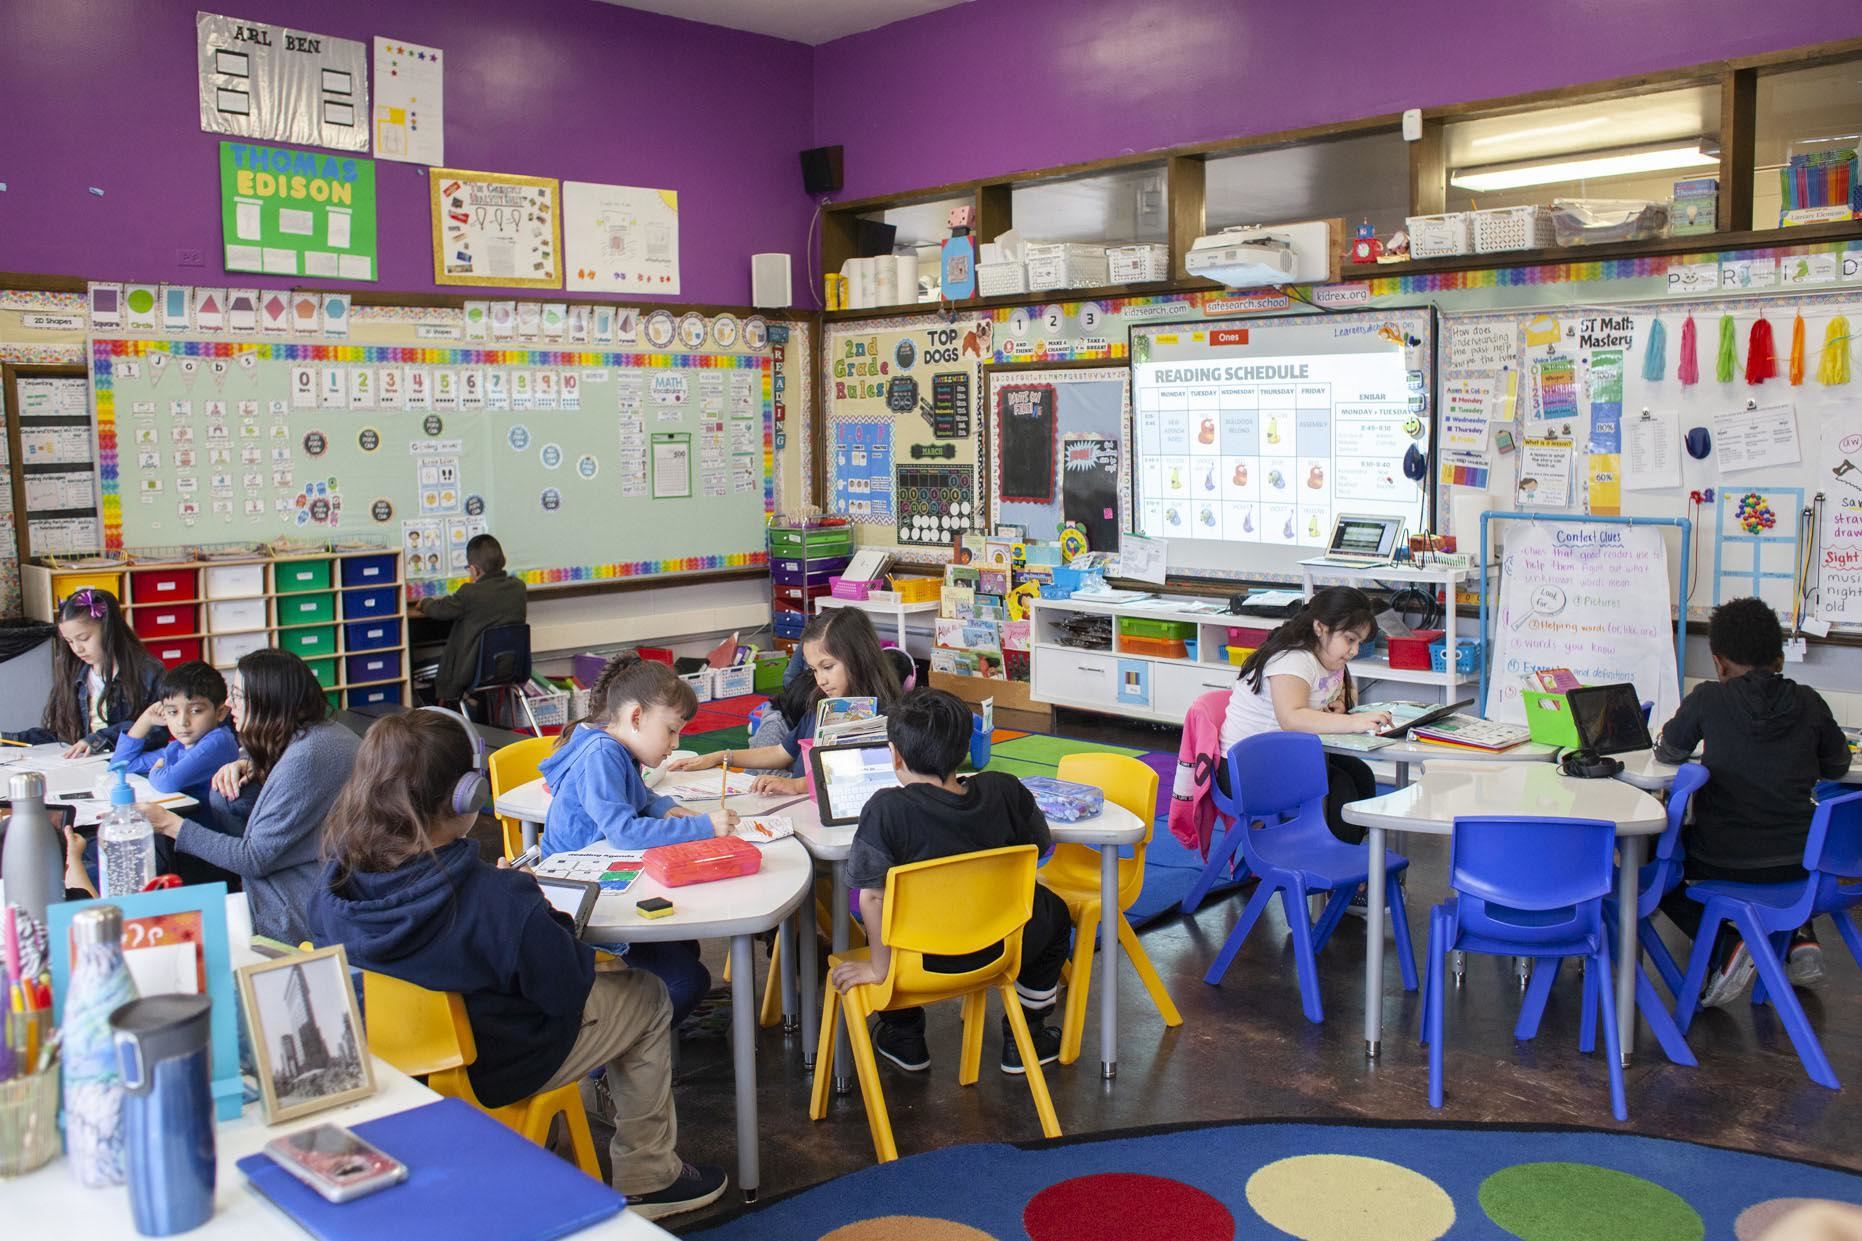 Students at CICS West Belden school work in the classroom at the Chicago charter school. The school employs the personalized learning method for its K-8 students. The school is part of the Chicago International Charter School network, and is managed by Distinctive Schools.